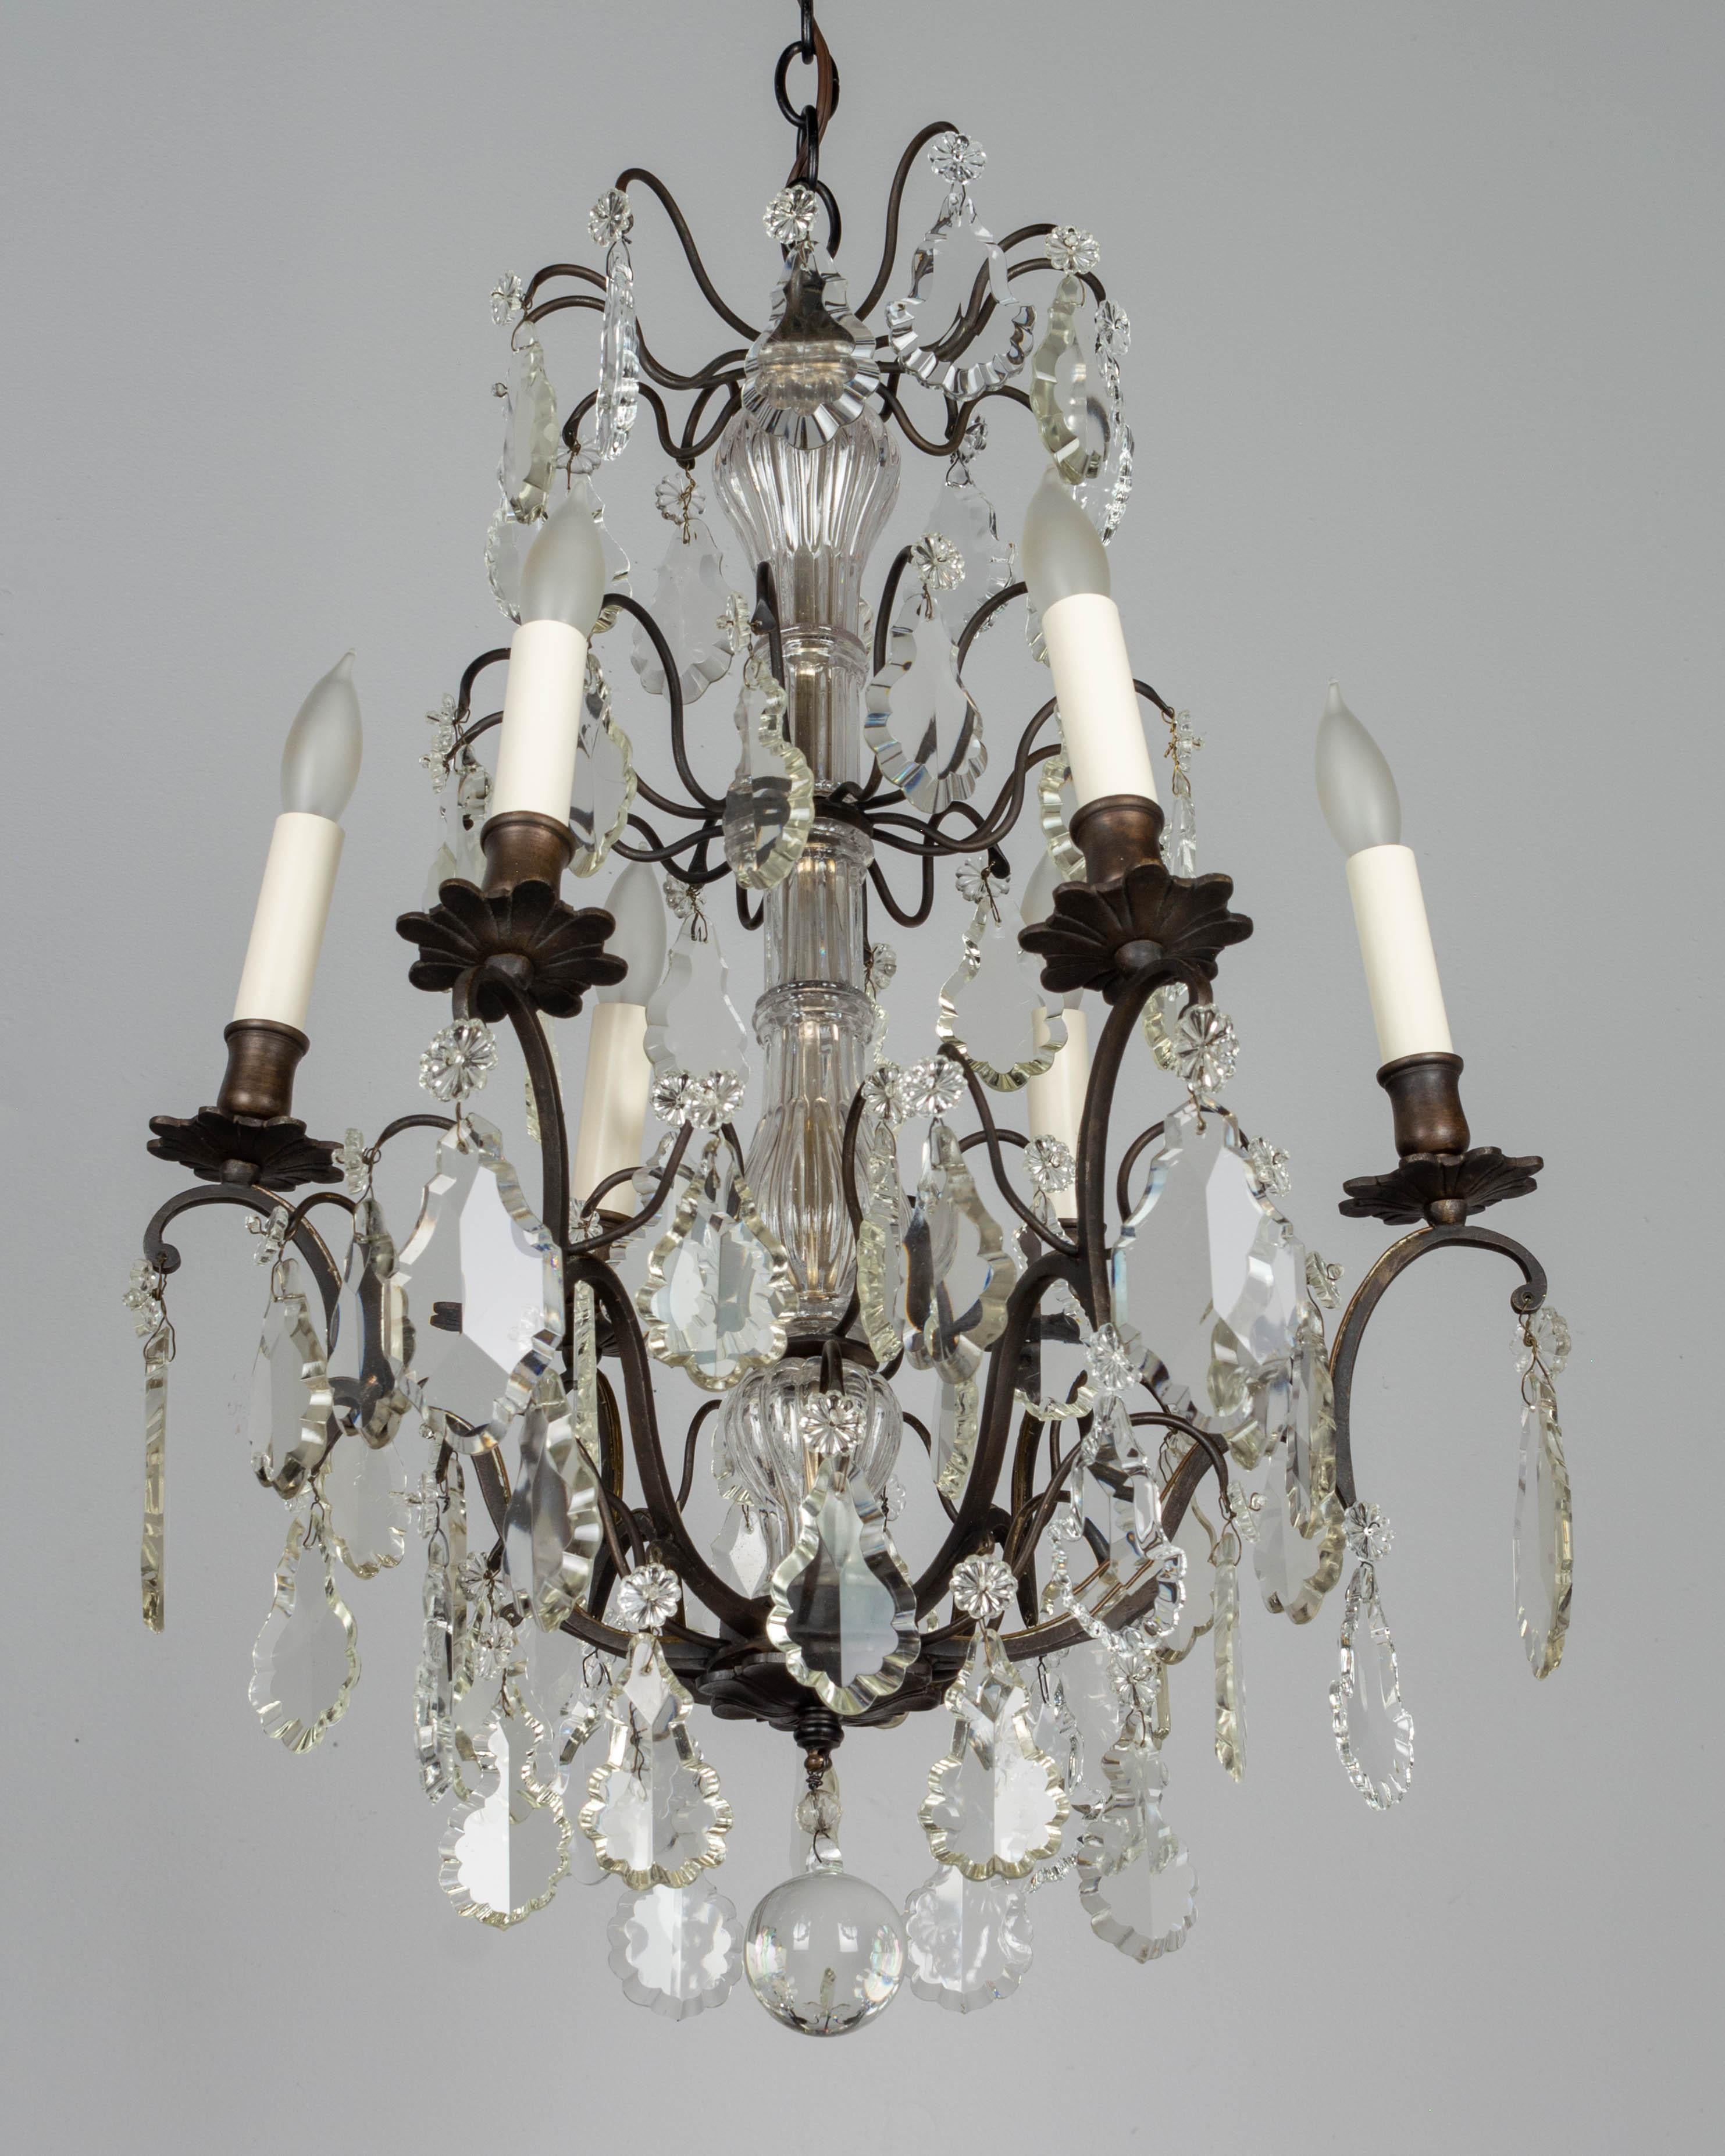 A French Louis XV style six-light chandelier with an assortment of crystal prisms, columns and rosettes. Brass frame with dark bronze patina. In working condition with wiring as found. New candle covers. Please refer to photos for more details.
 